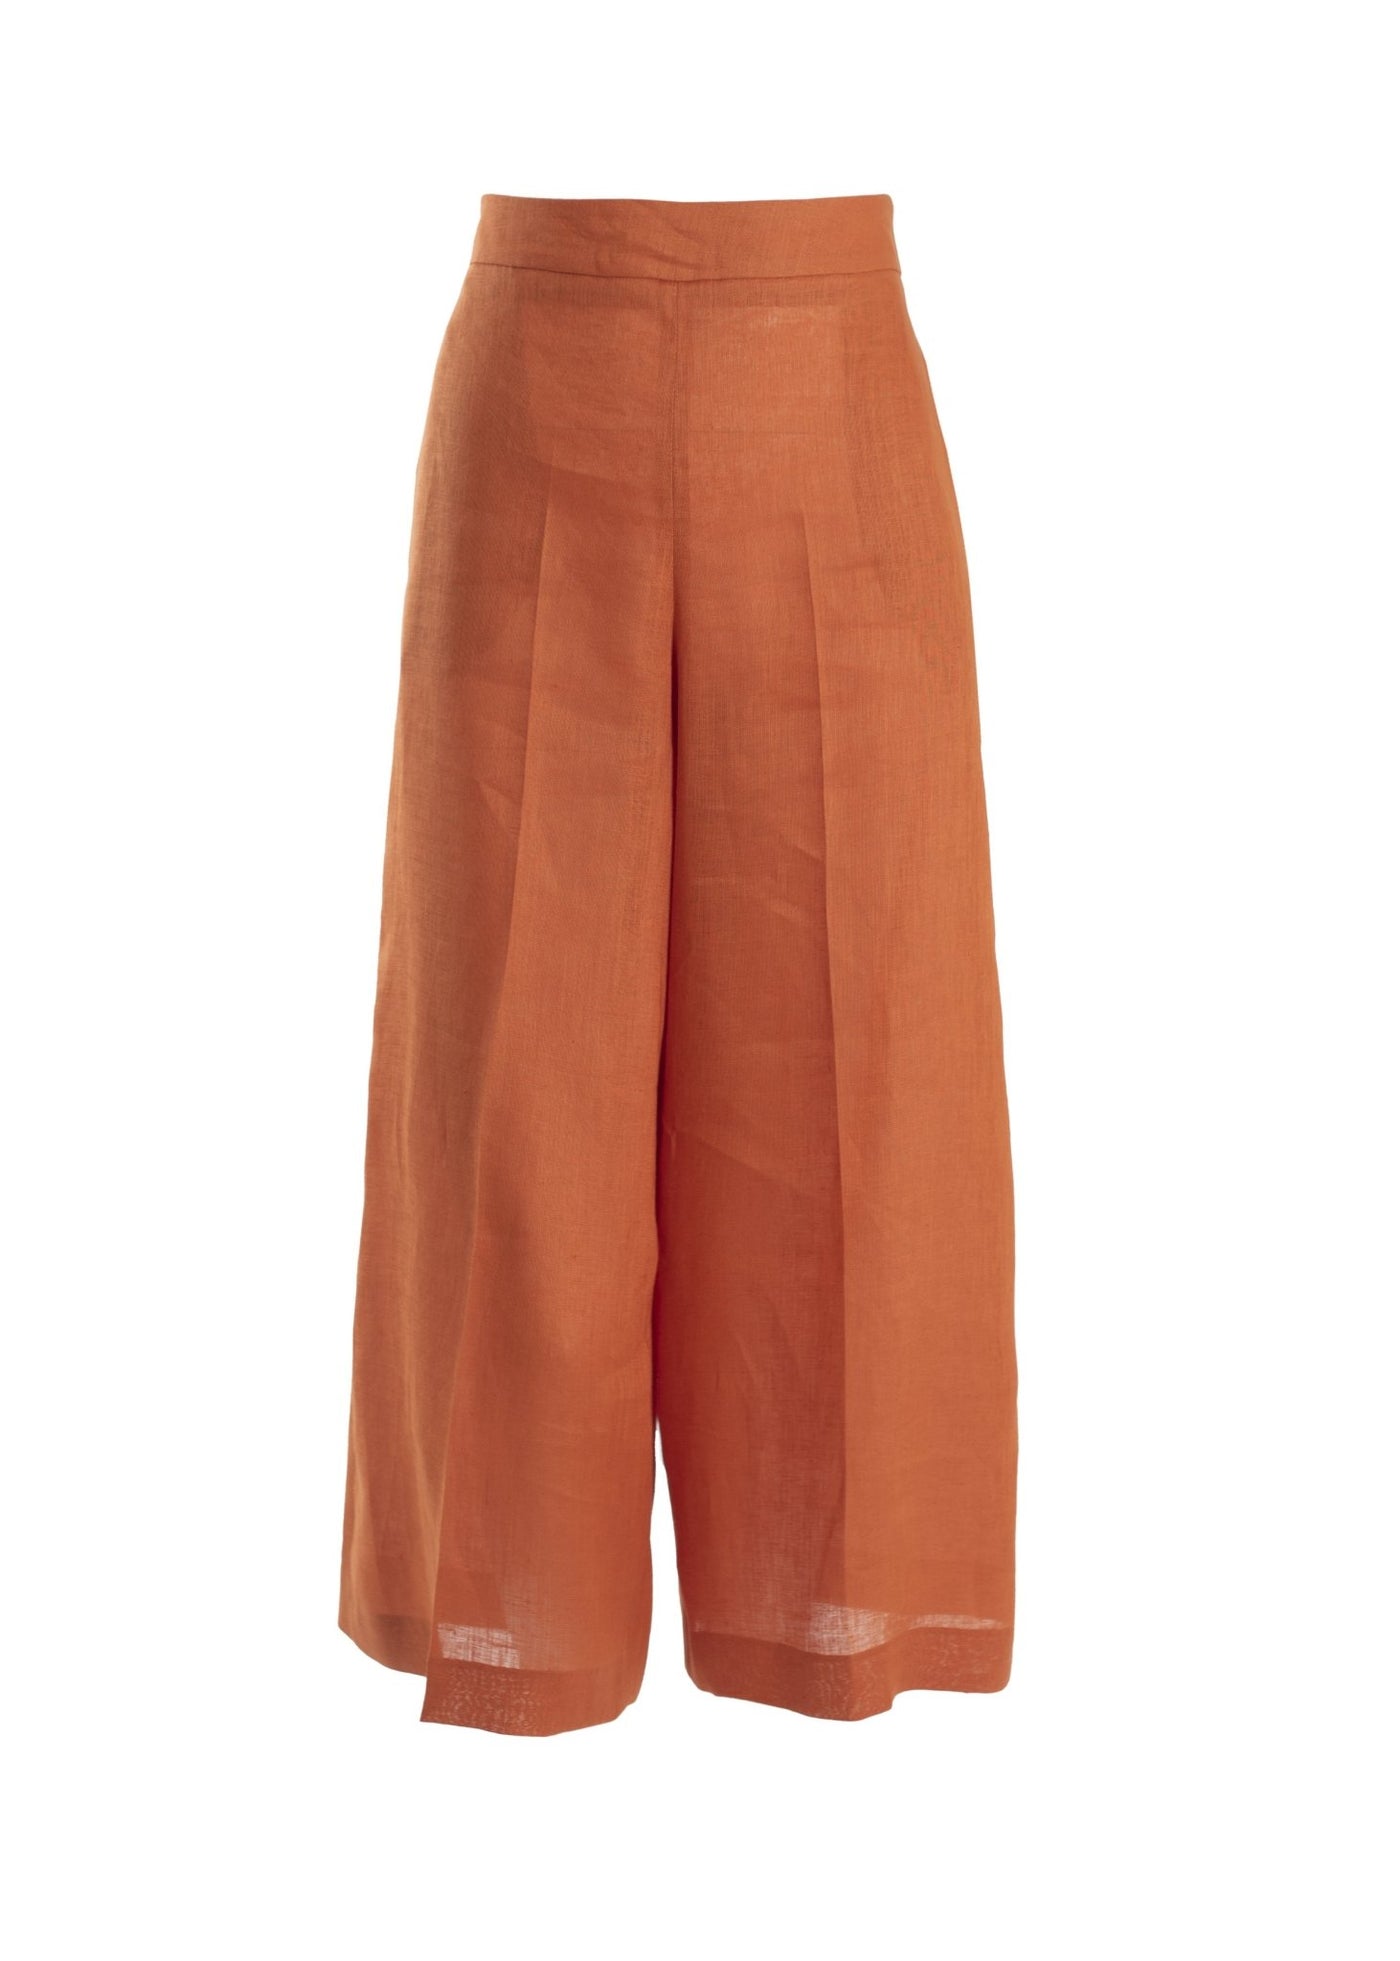 Orange Linen Culotte - The Clothing LoungeNOPIN